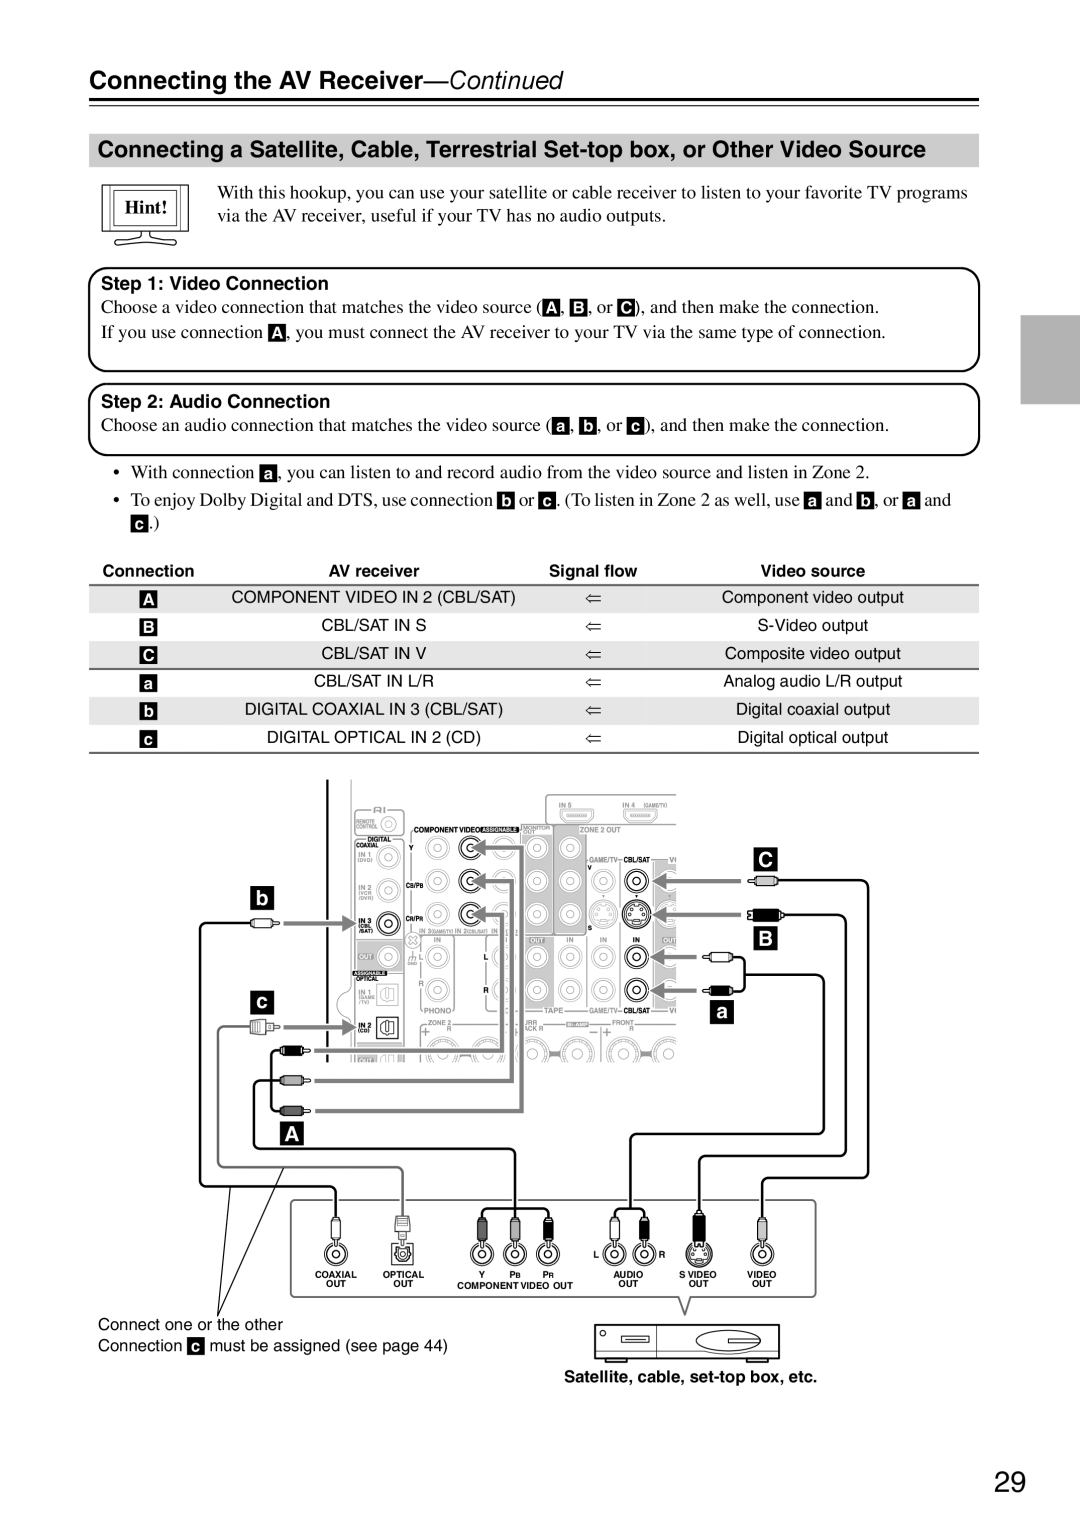 Onkyo DTR-7.9 instruction manual C b B, Connecting the AV Receiver—Continued, Hint, Satellite, cable, set-topbox, etc 